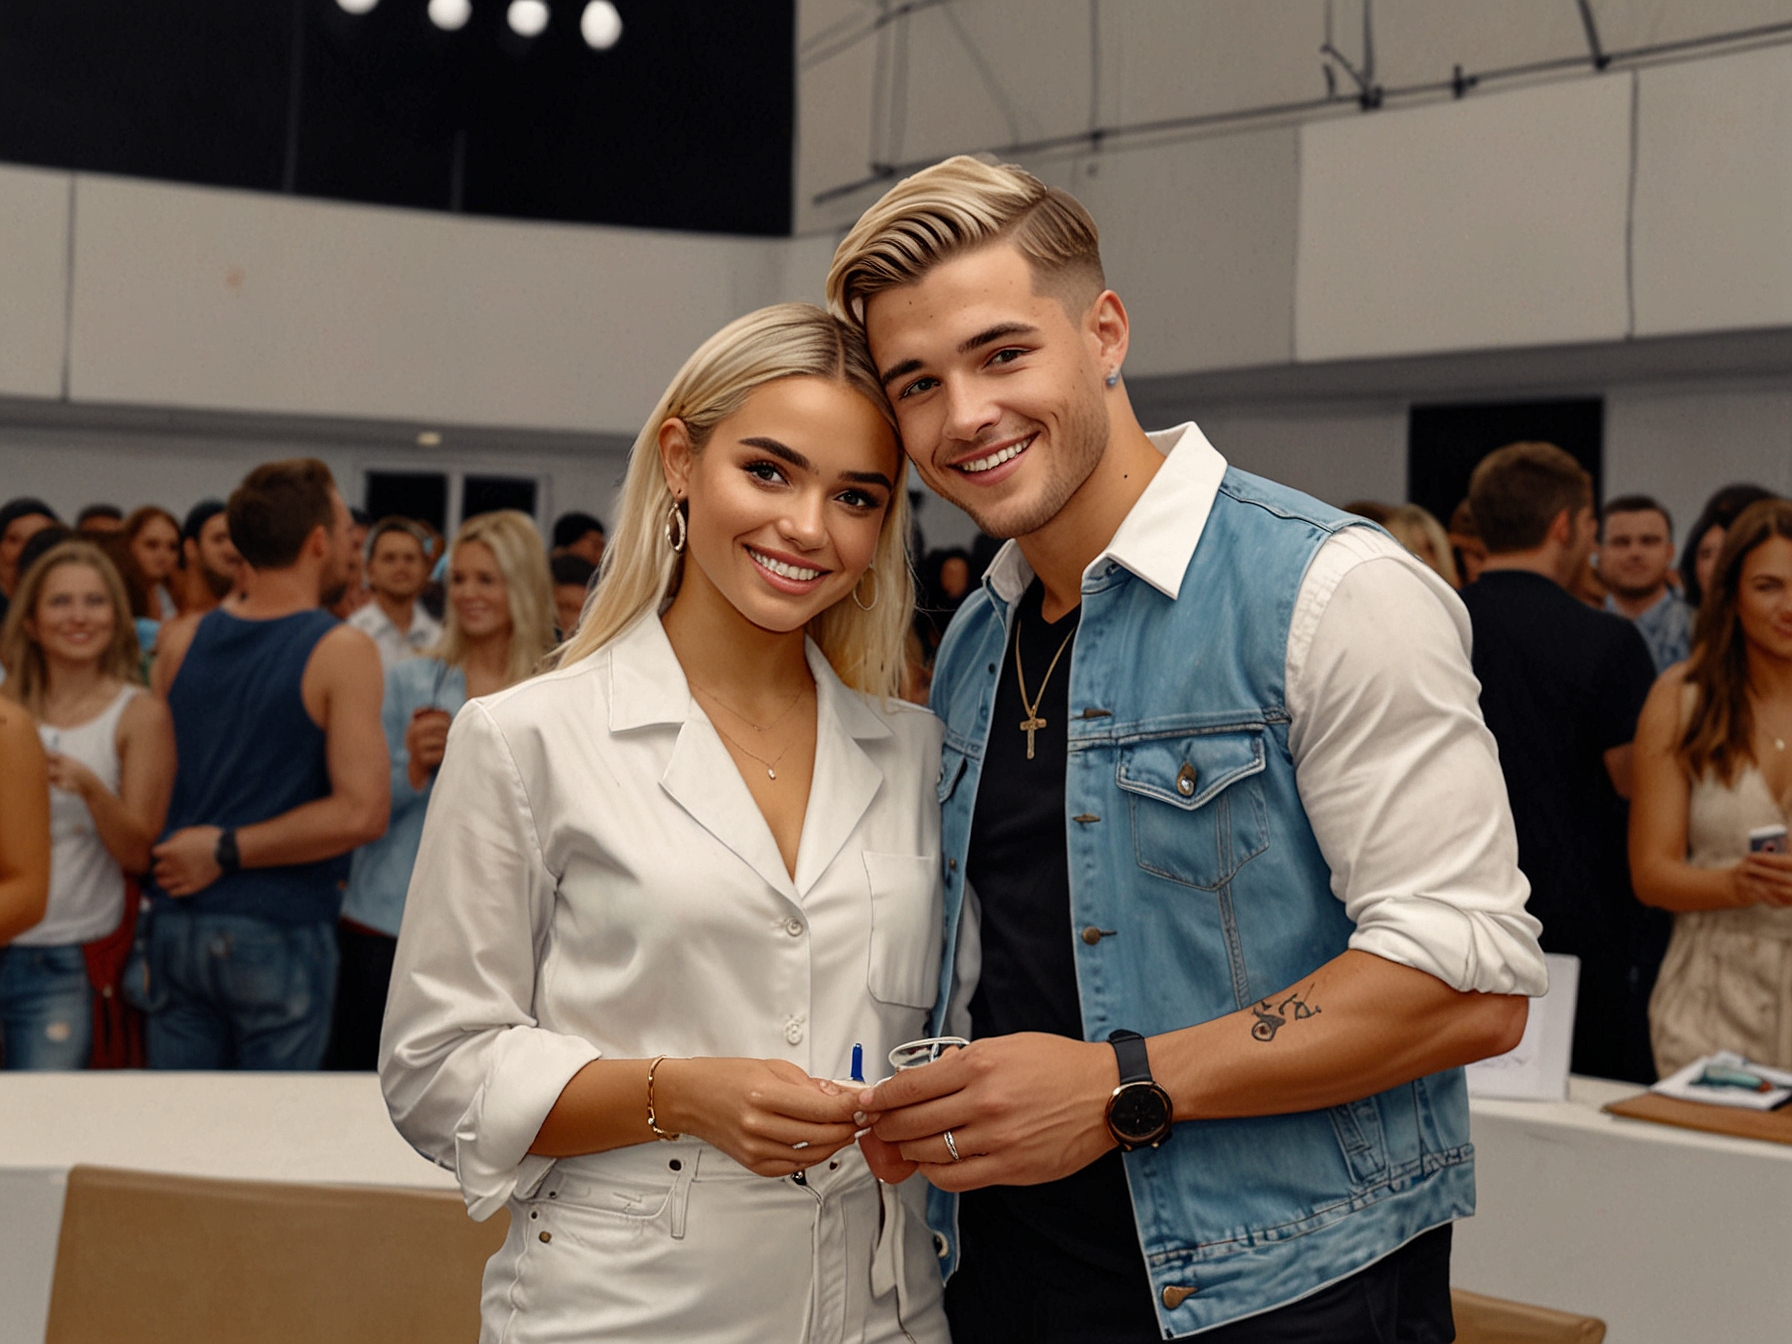 Molly-Mae and Tommy at a public event, interacting with fans, showcasing their thriving careers and public life as they balance parenthood and personal ambitions.